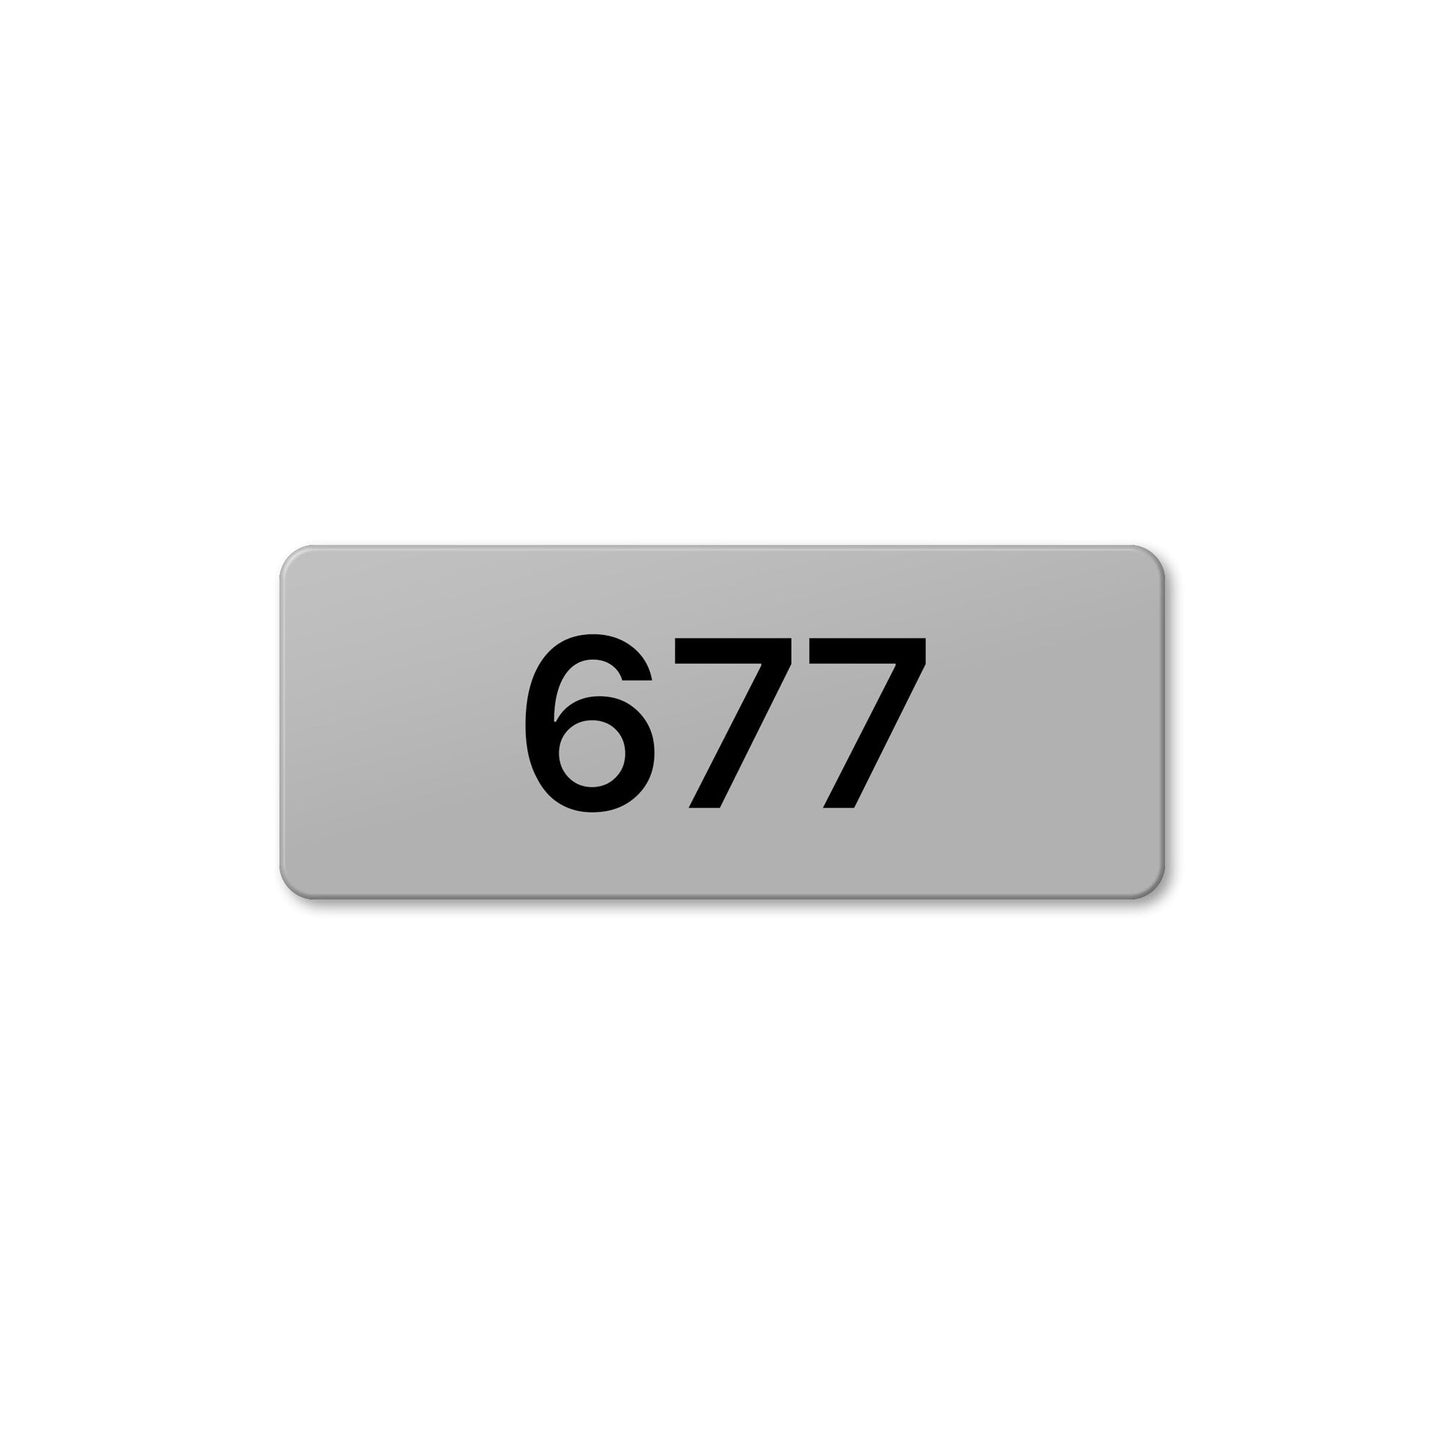 Numeral 677